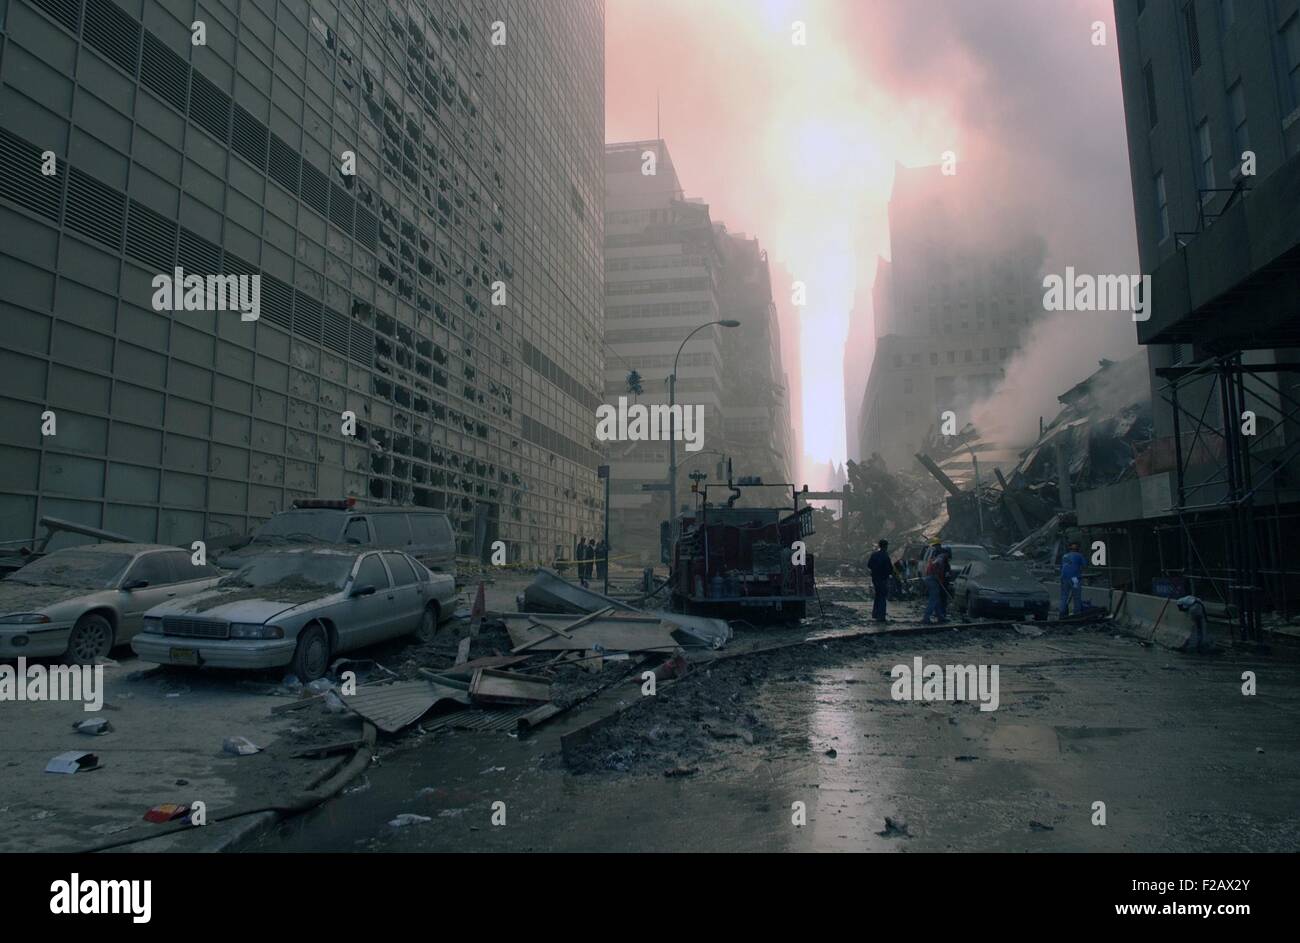 The wreckage of WTC 7, the newest building in the complex which collapsed at 5:20 PM on 9-11. Photo was taken on Barclay Street, looking east toward West Broadway. World Trade Center, New York City, after September 11, 2001 terrorist attacks. (BSLOC 2015 2 69) Stock Photo